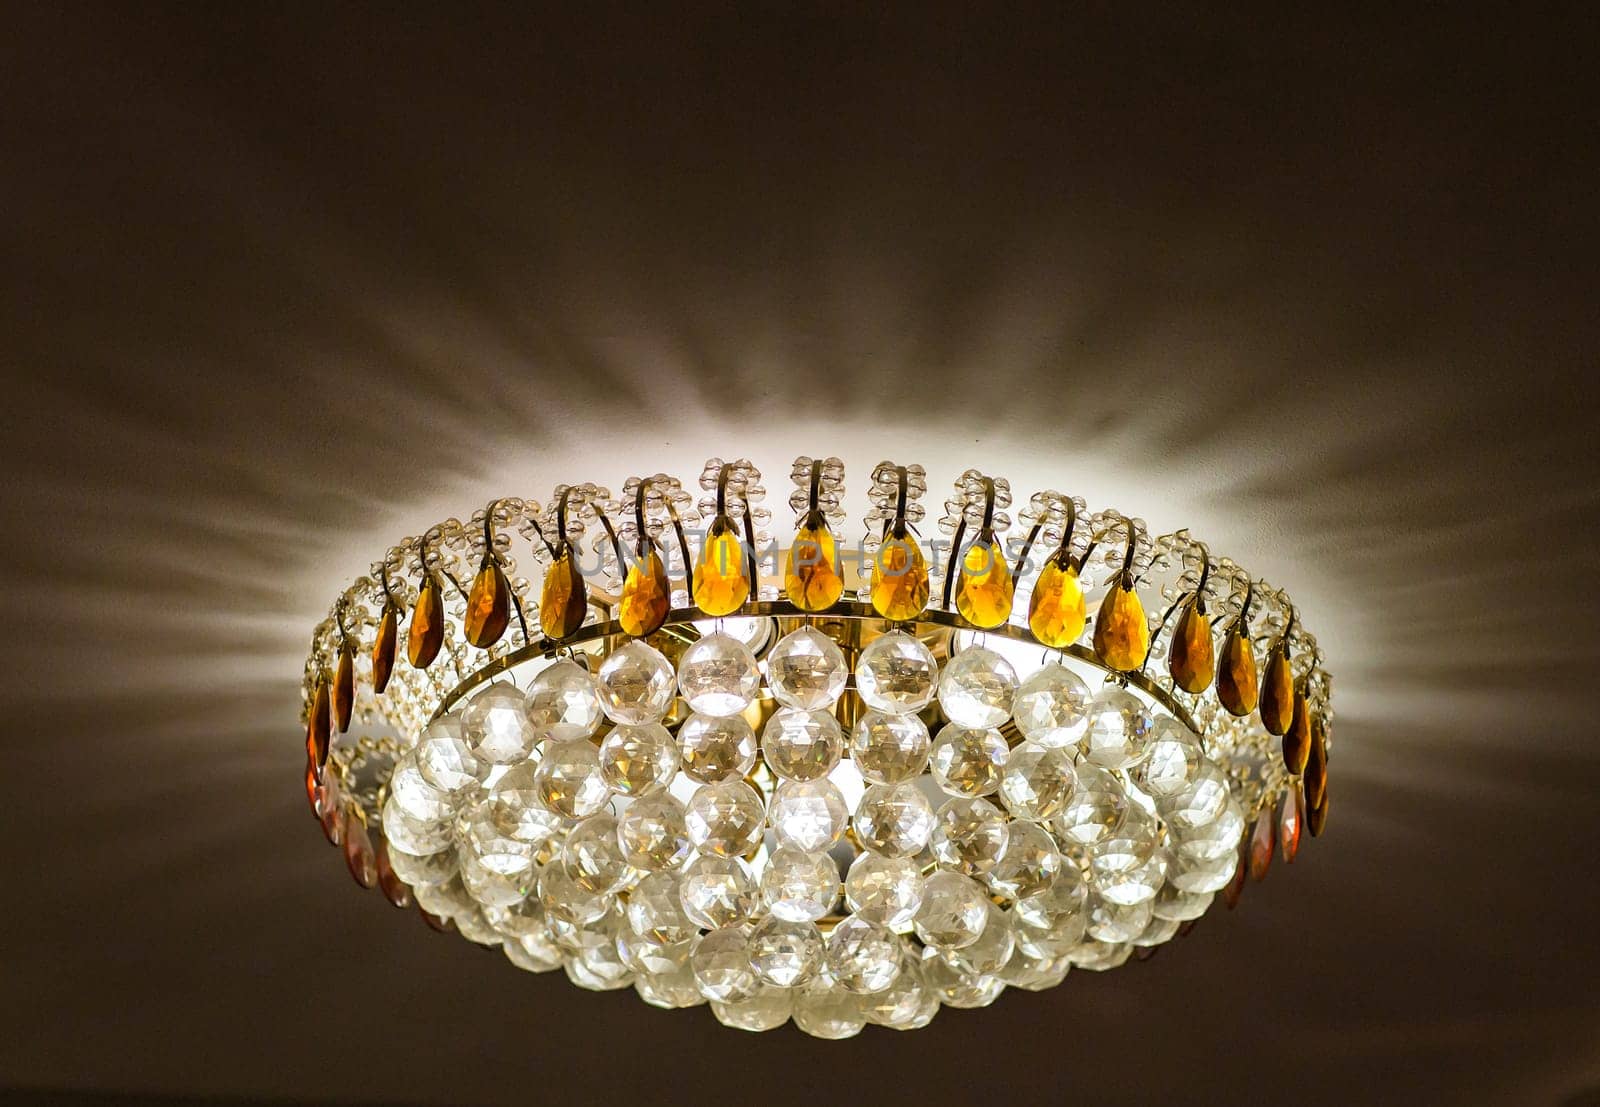 Chrystal chandelier close-up. by Satura86